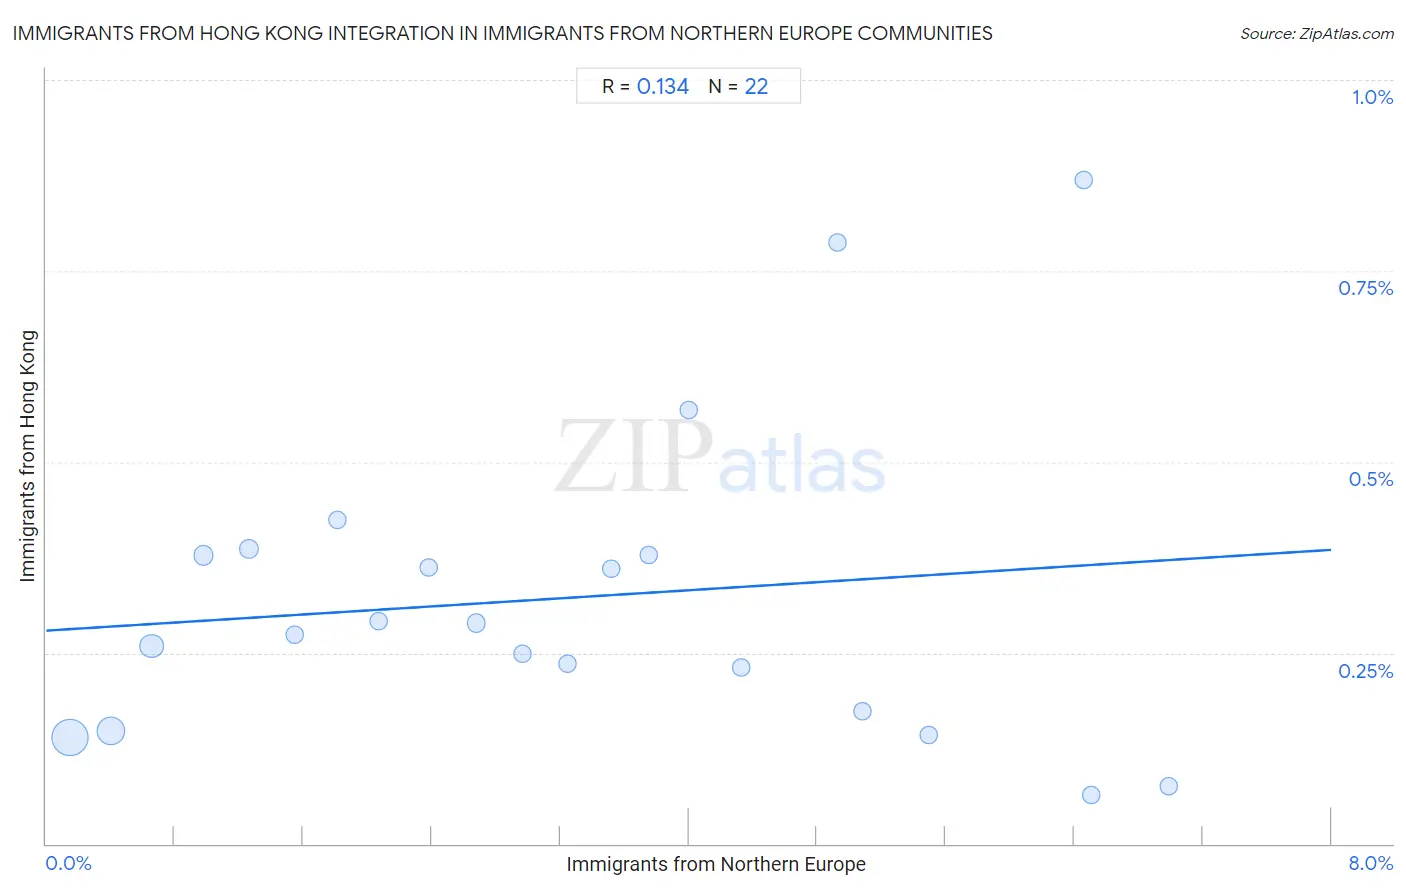 Immigrants from Northern Europe Integration in Immigrants from Hong Kong Communities